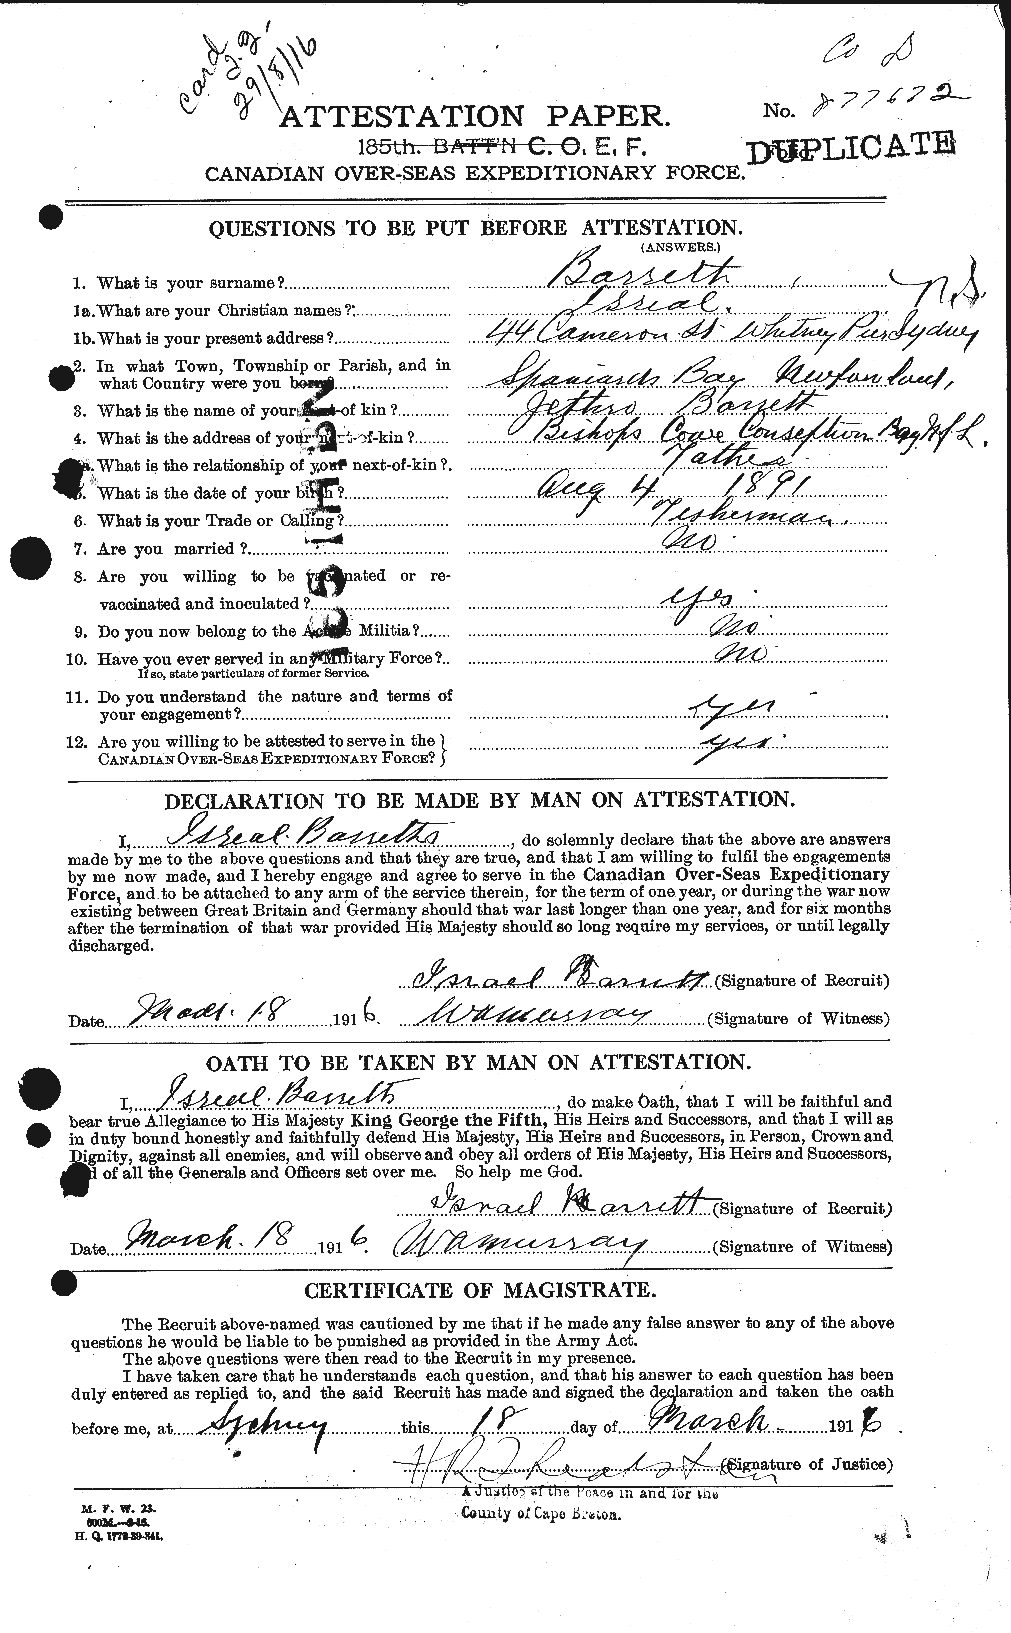 Personnel Records of the First World War - CEF 220269a